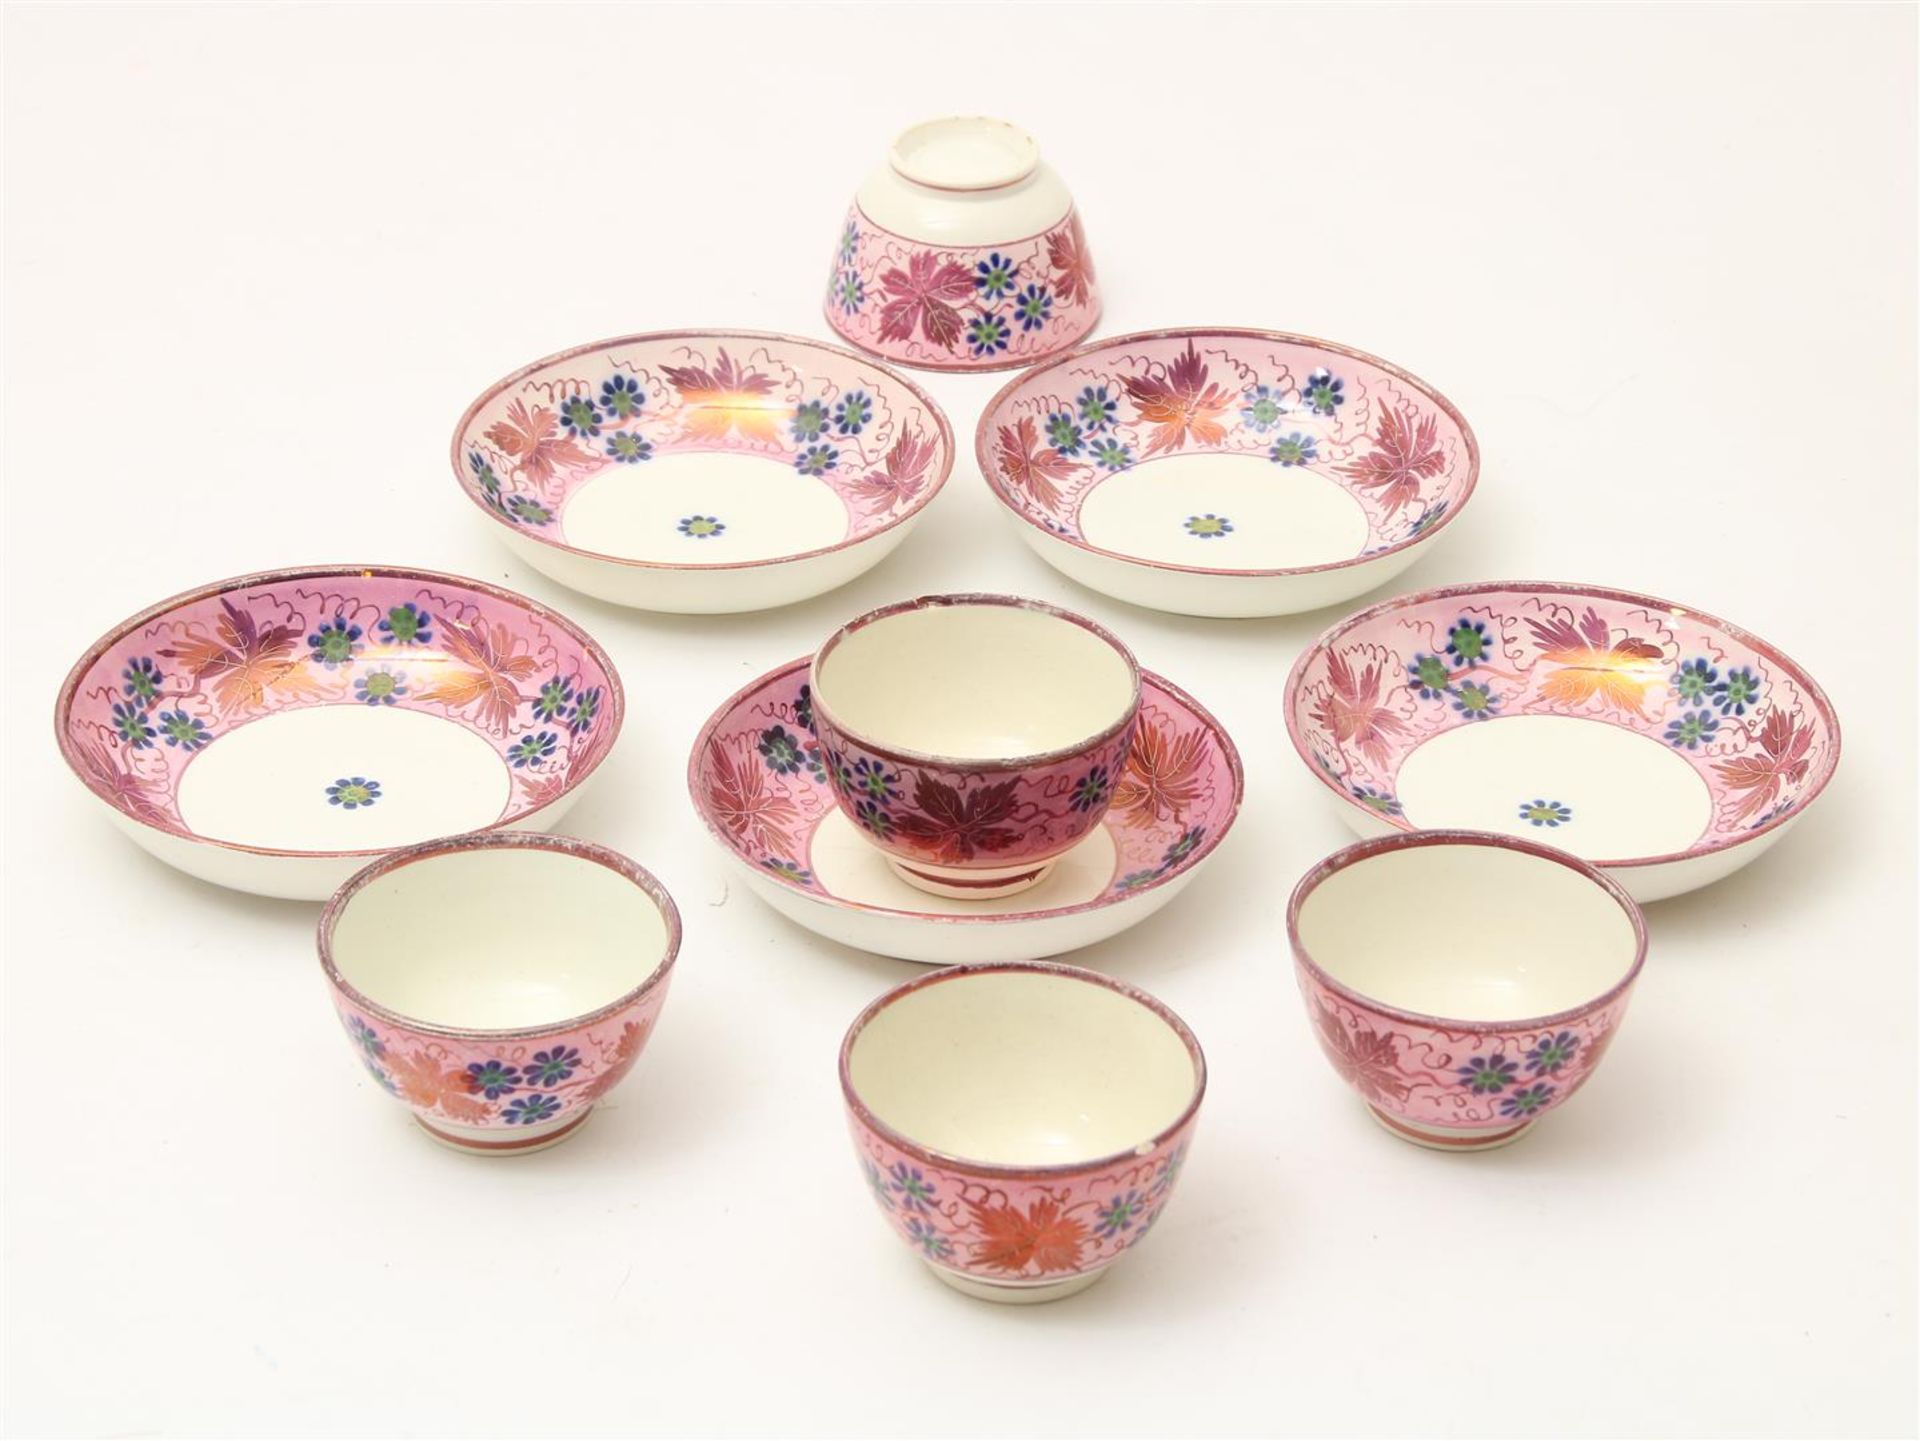 Lot of 5 earthenware cups and saucers, marked Petrus Regout ca. 1855-1880, 5 earthenware cups and - Image 6 of 16